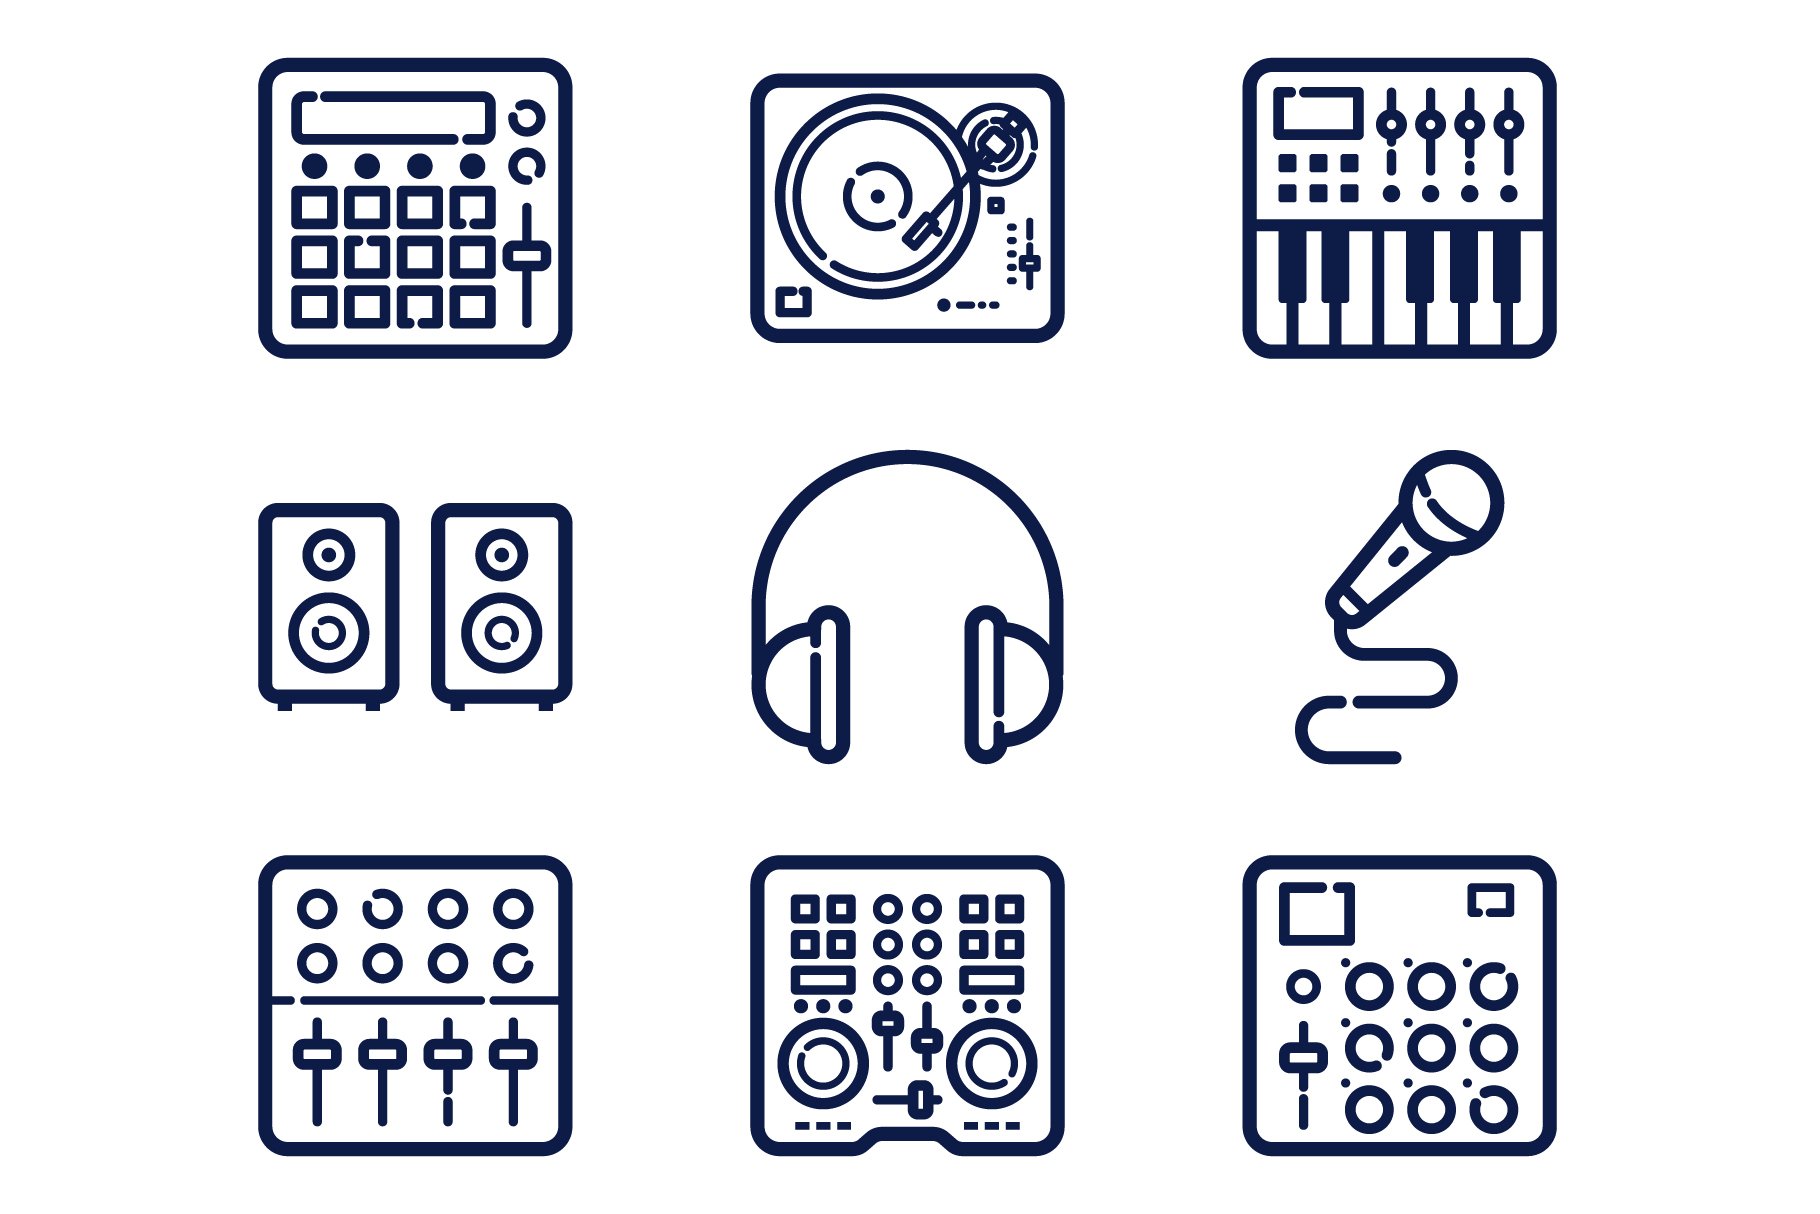 9 Music Production Icons cover image.